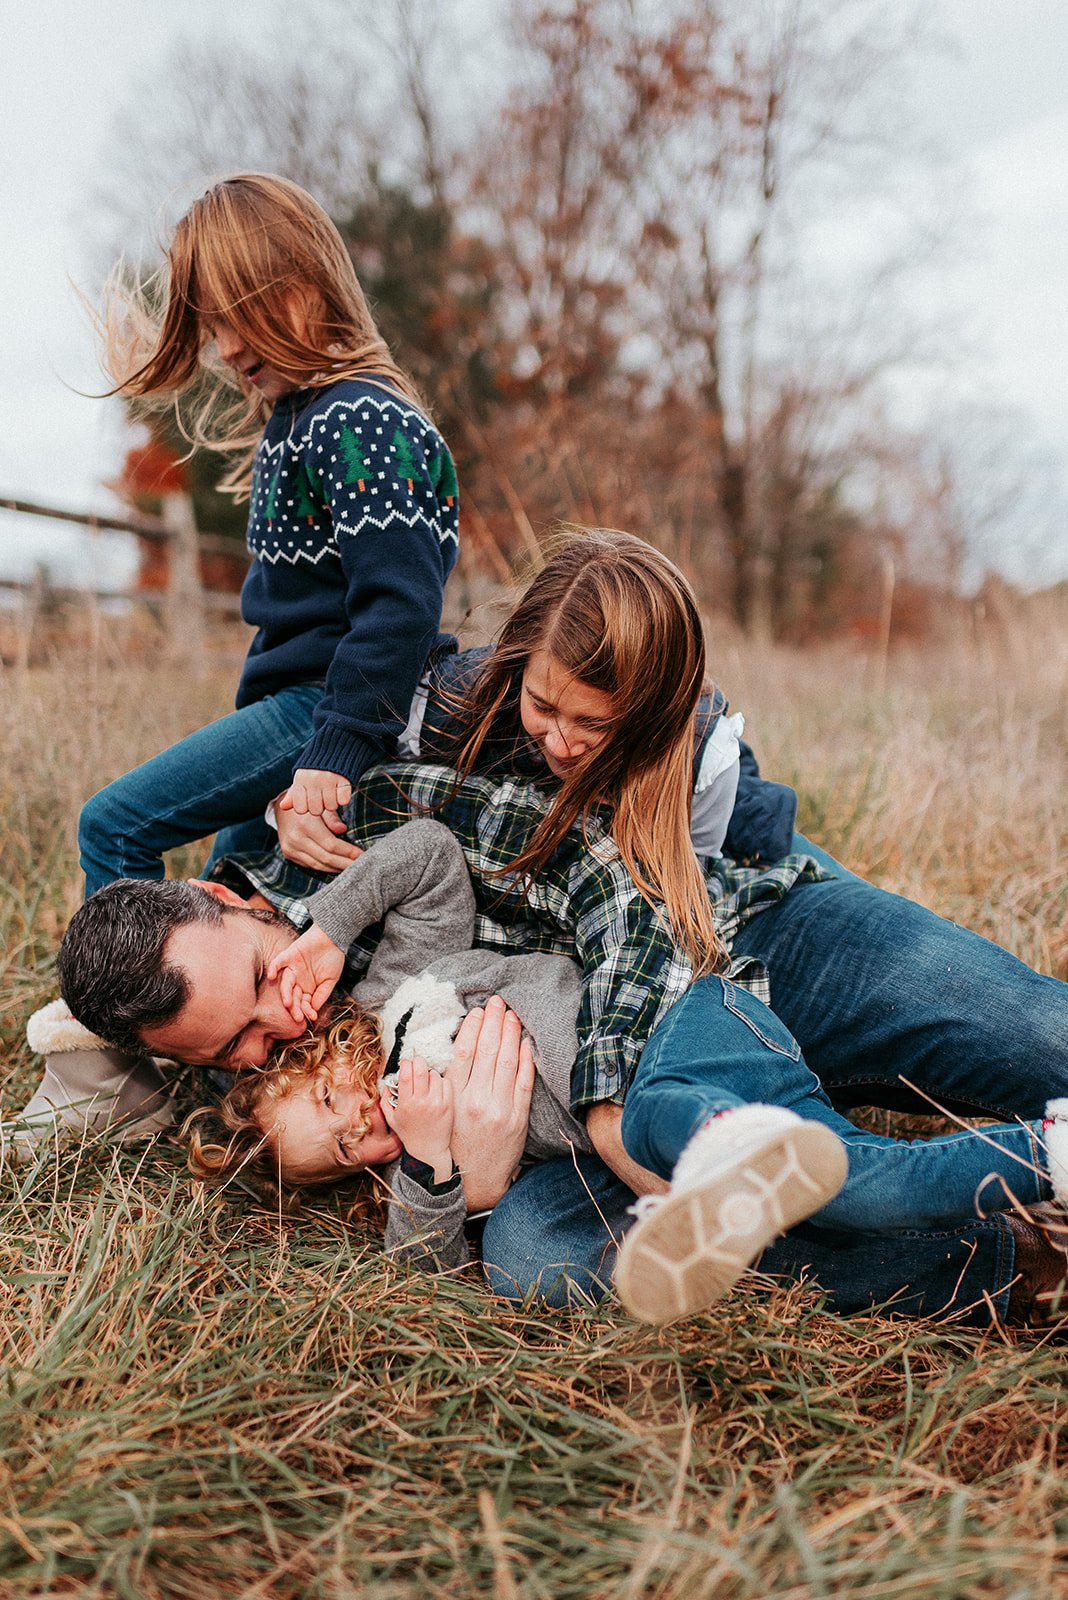 State College Family Portraits, Family Lifestyle Shoot, Savita Sittler Photography